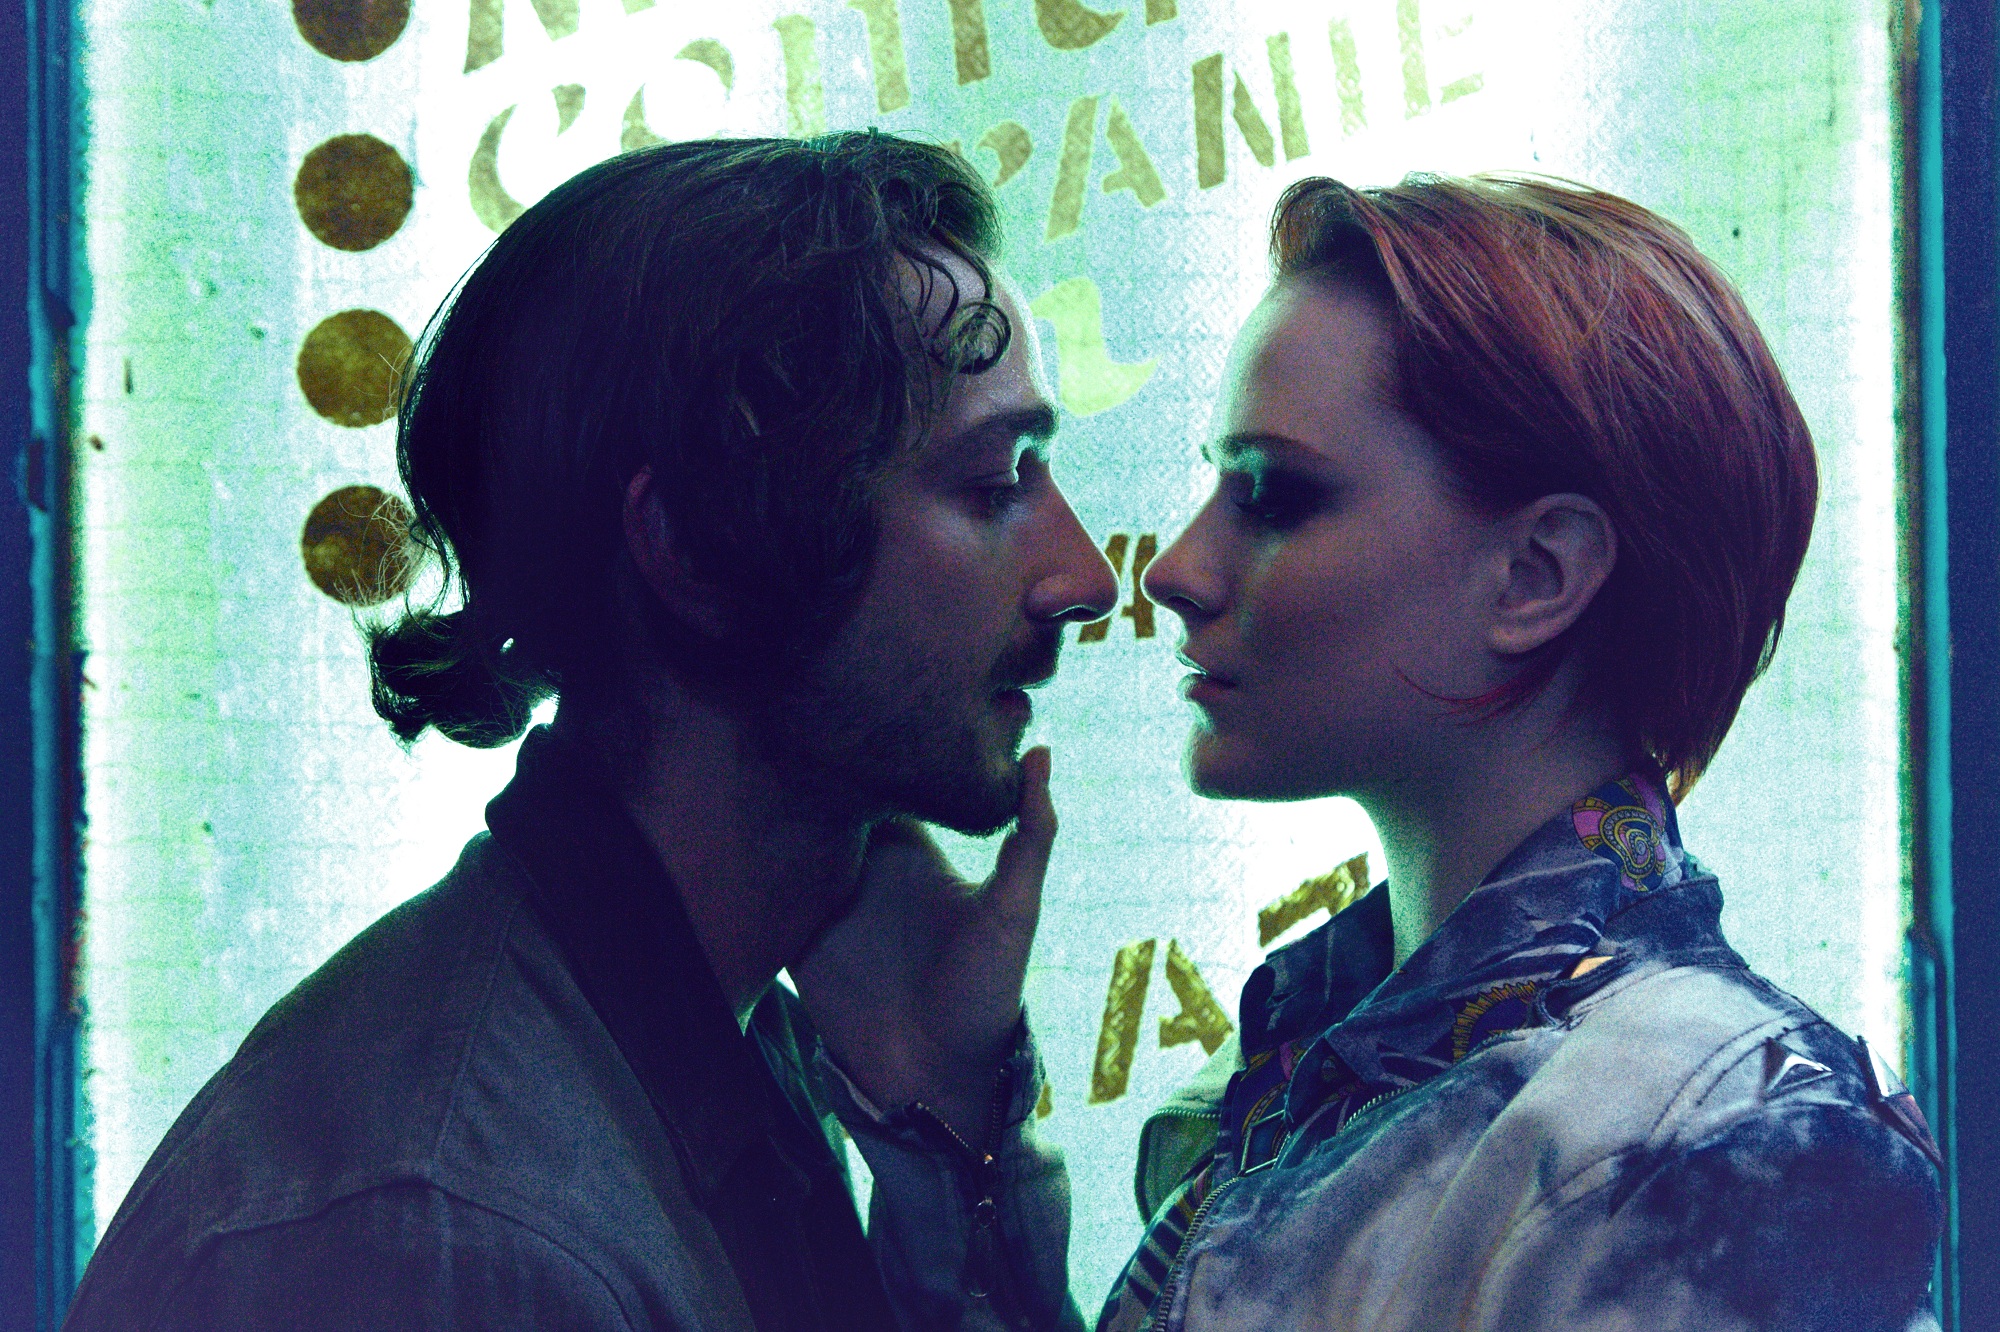 Shia-LaBeouf-and-Evan-Rachel-Wood-in-The-Necessary-Death-of-Charlie-Countryman